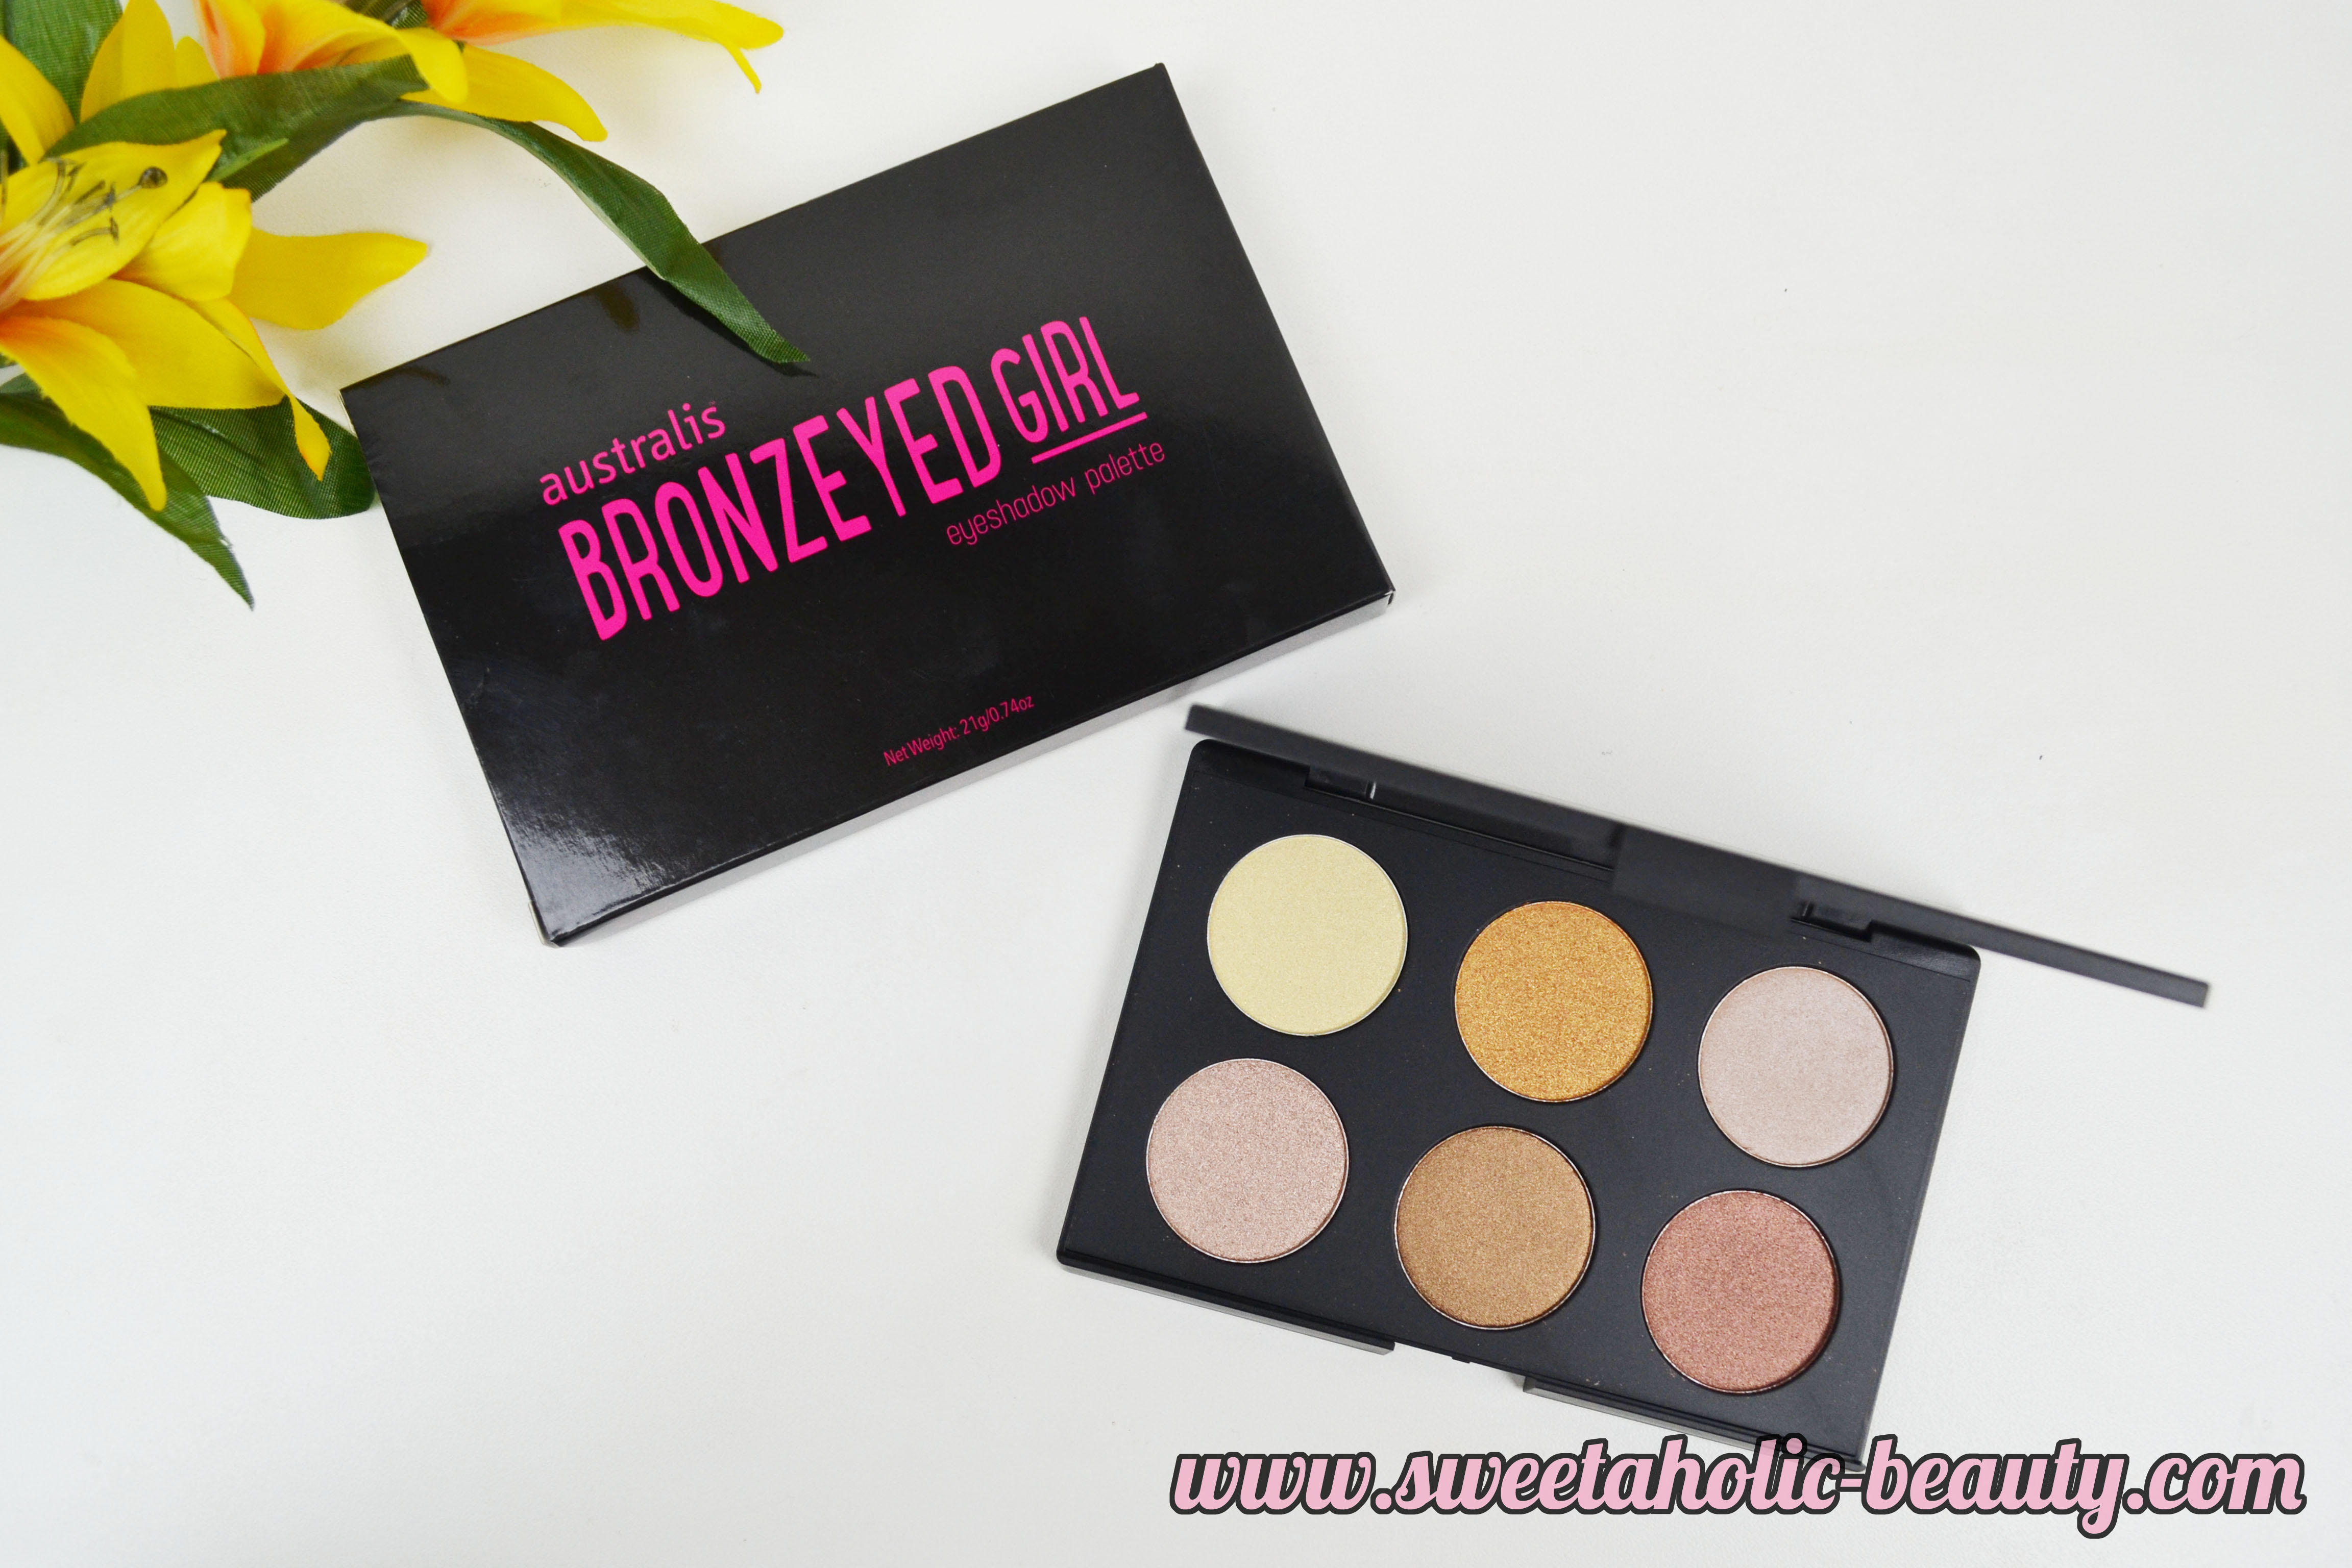 Australis Bronzeyed Girl Eyeshadow Palette Review & Swatches - Sweetaholic Beauty